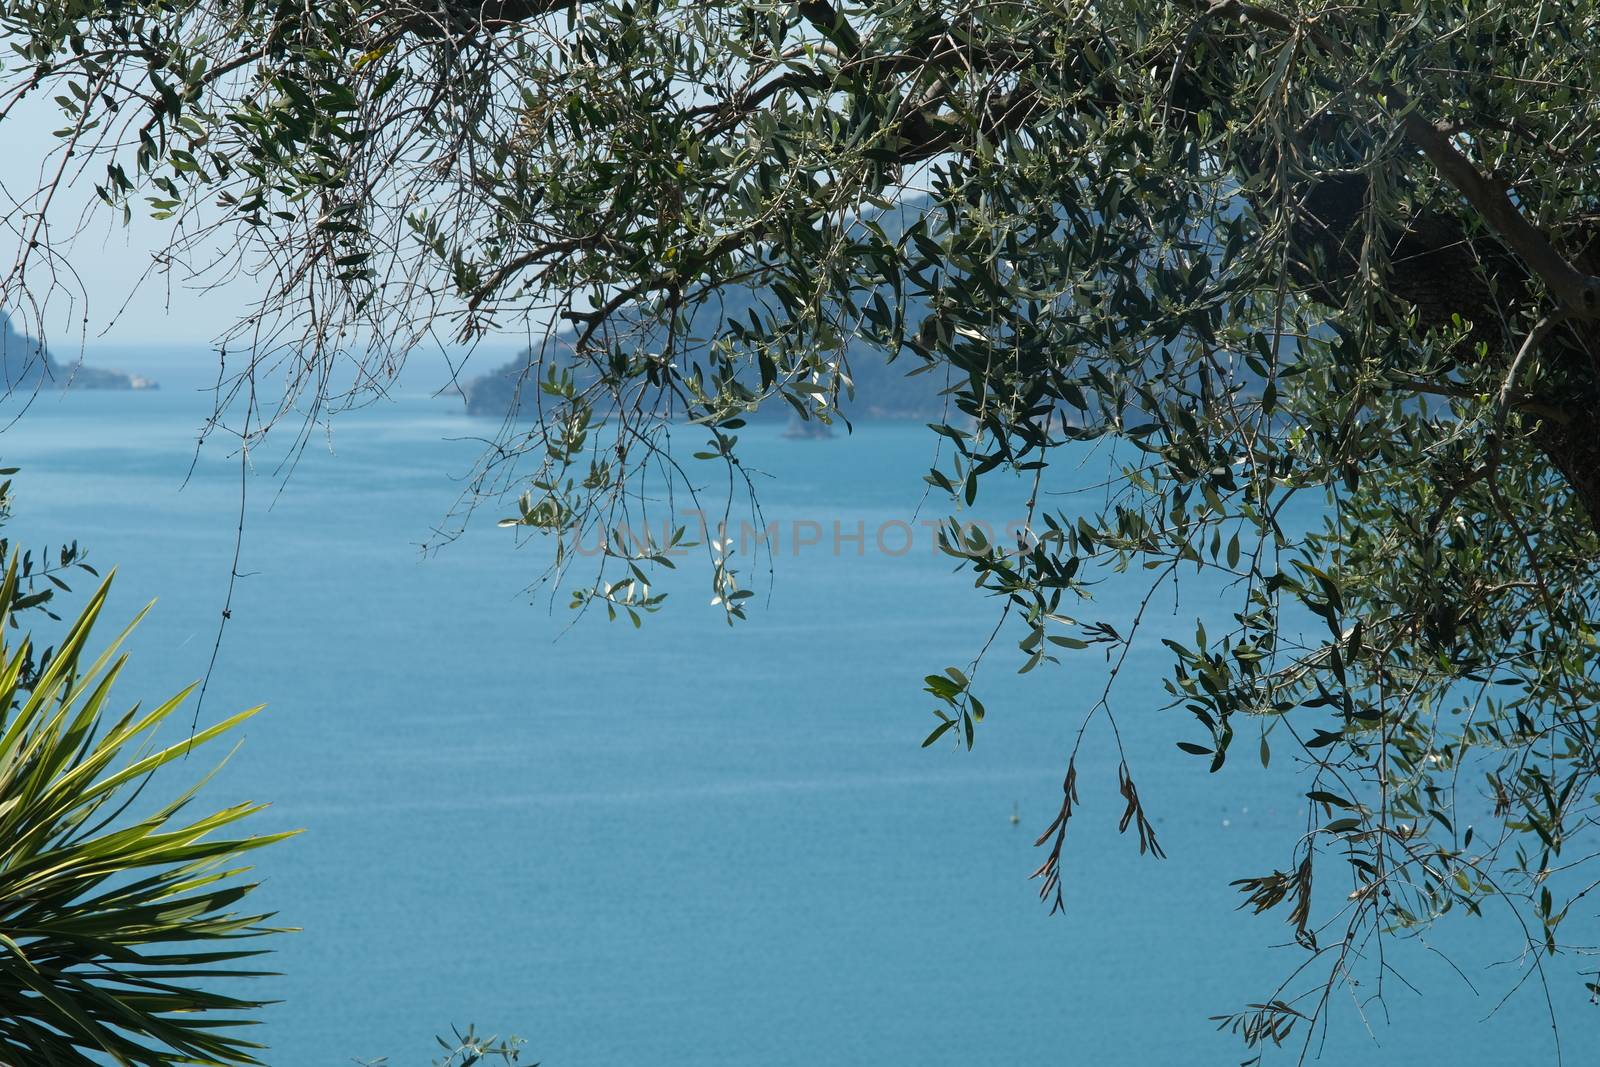 Olive leaves photographed in the Gulf of La Spezia with the background of the Isola del Tino.